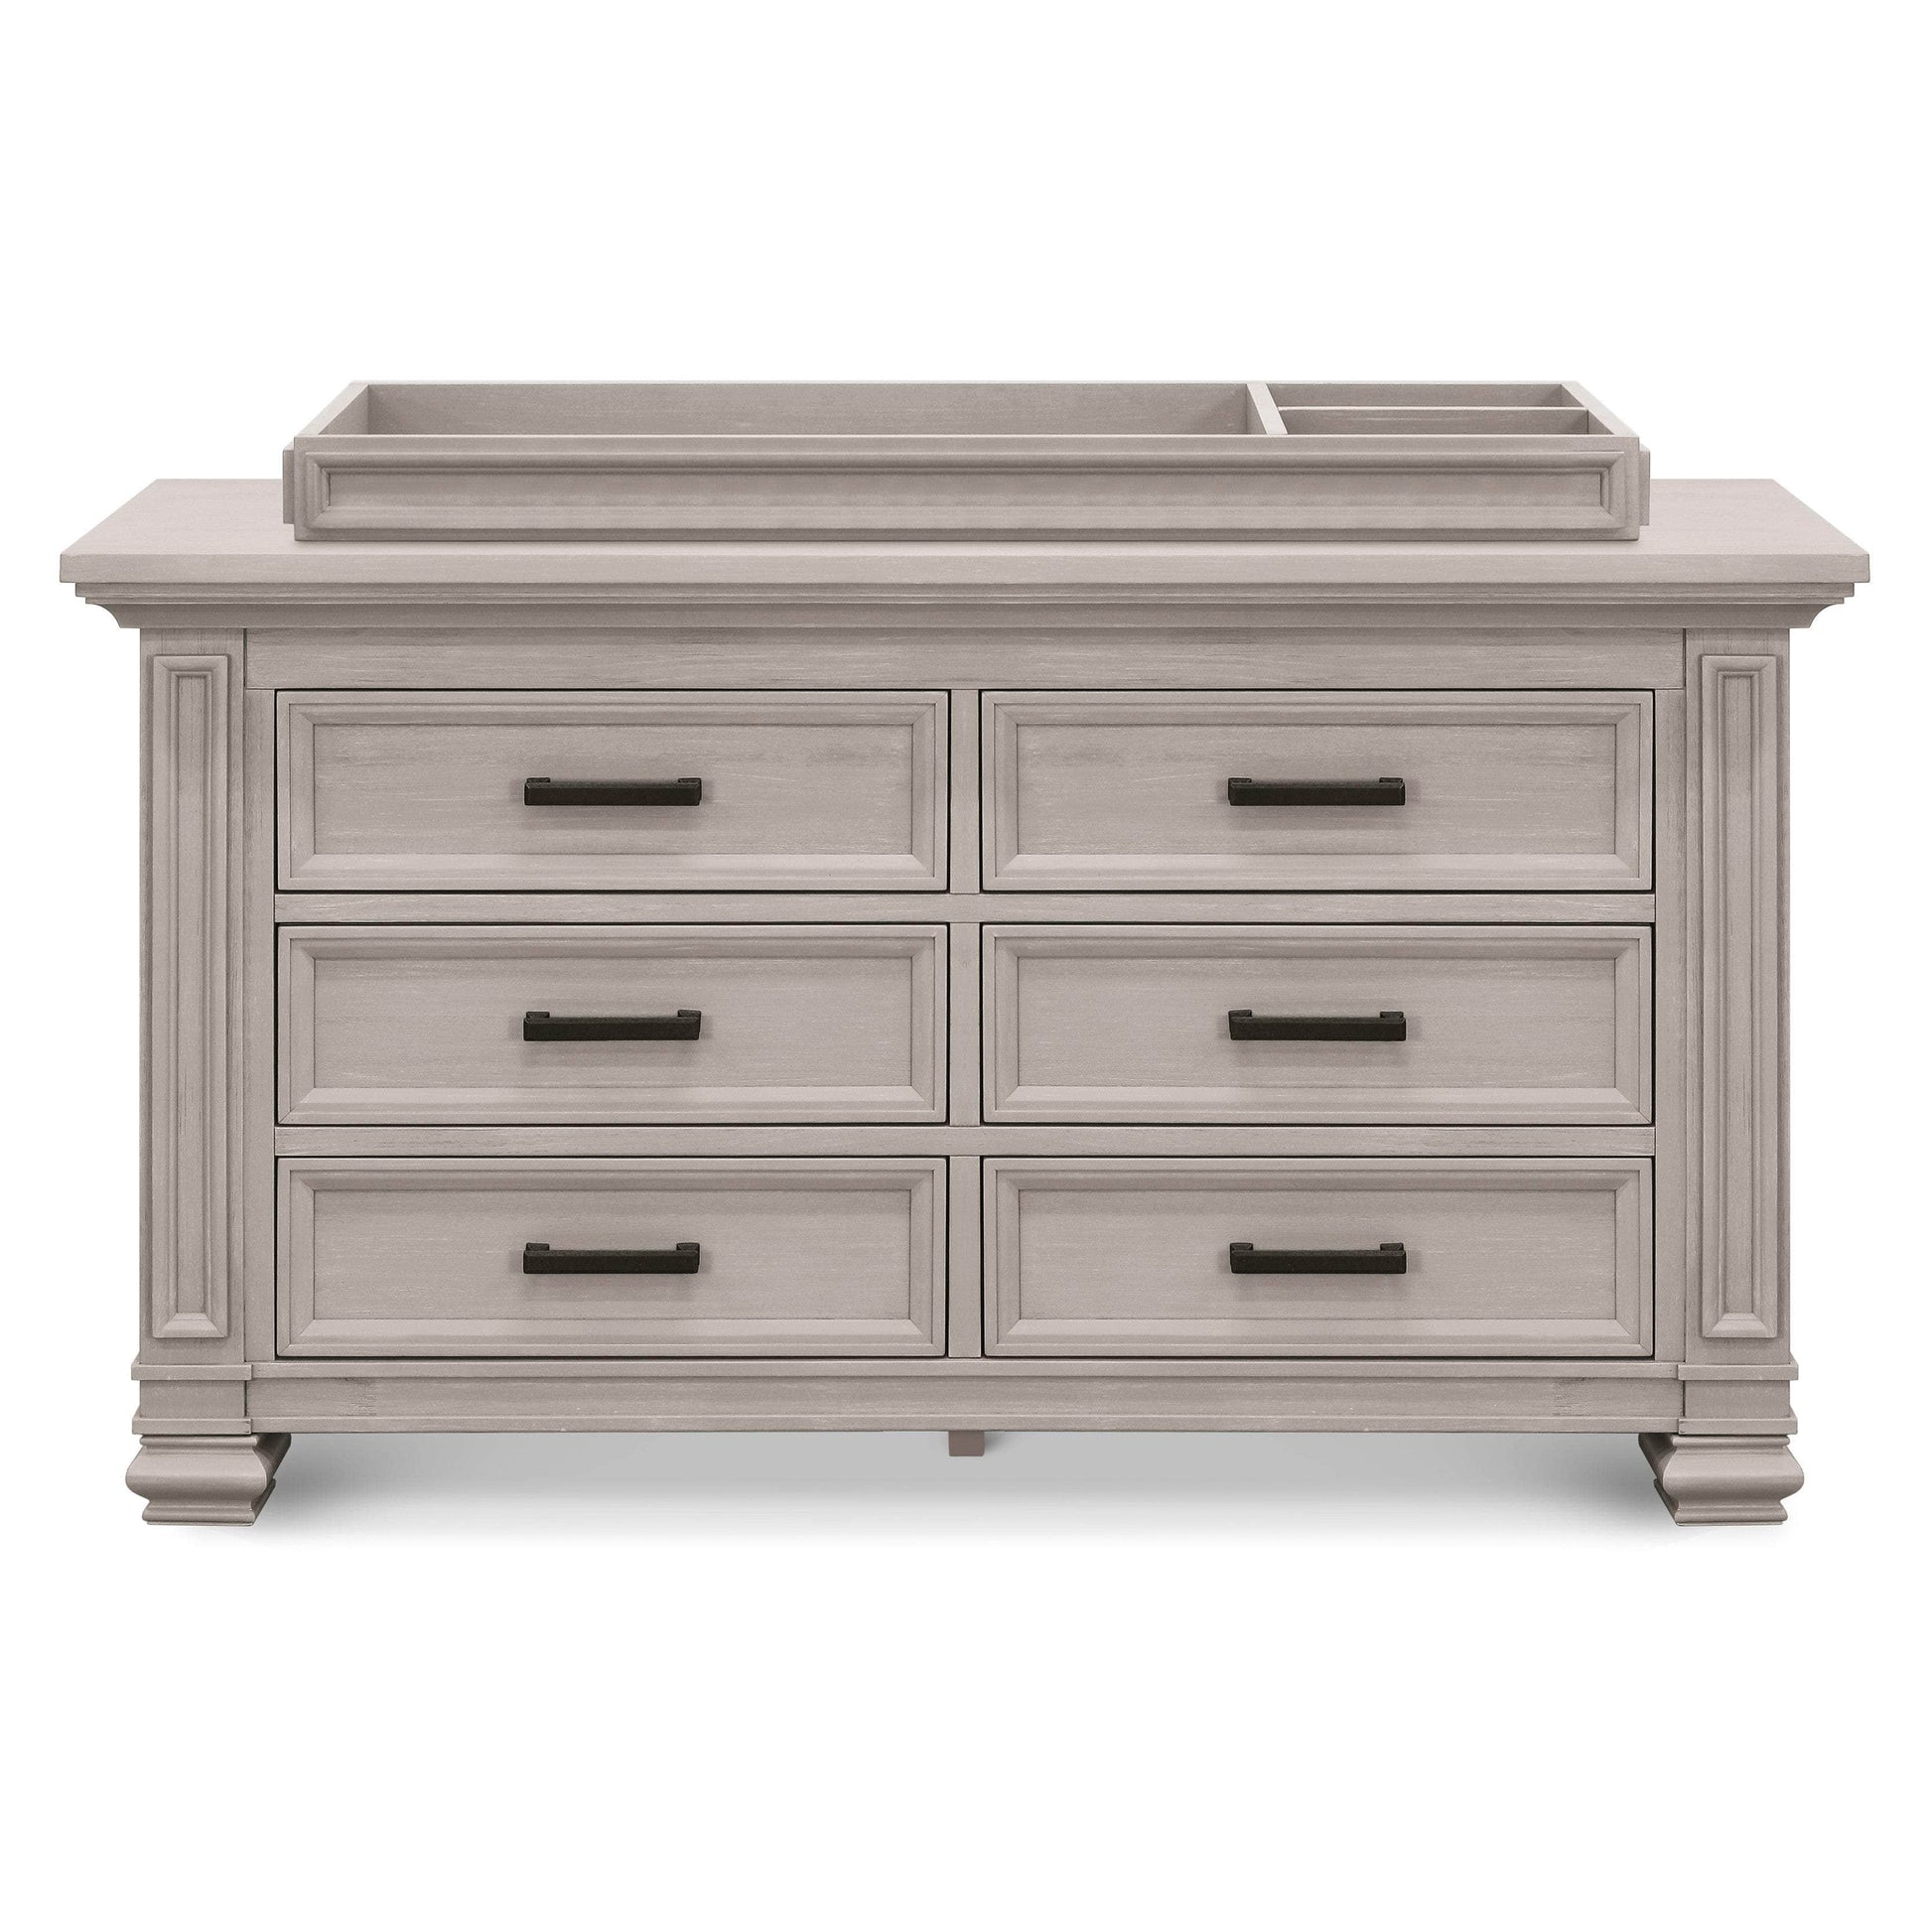 M17326MST,Palermo 6-Drawer Double Dresser in Moonstone